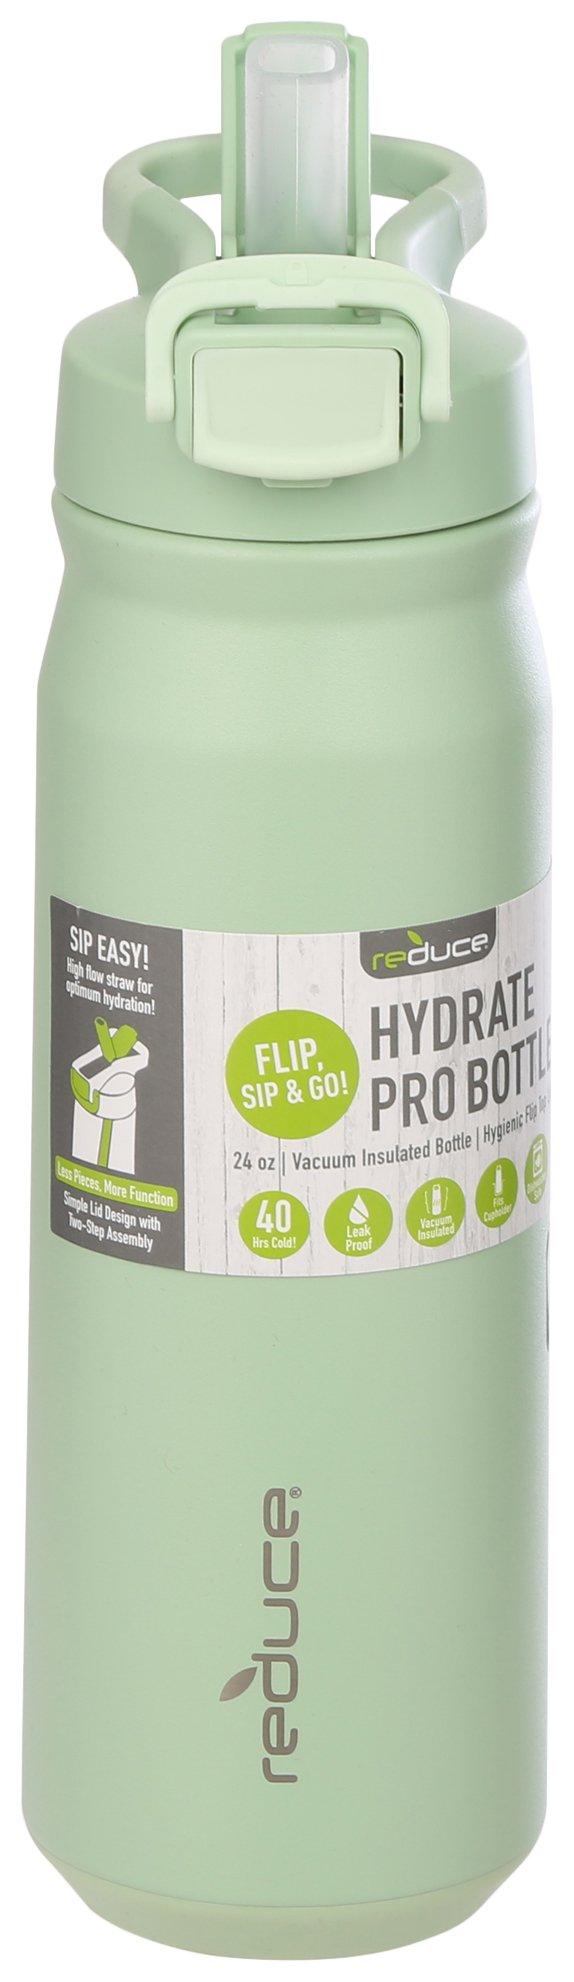 Reduce Bottle, Canteen, Vacuum Insulated, 32 Ounce